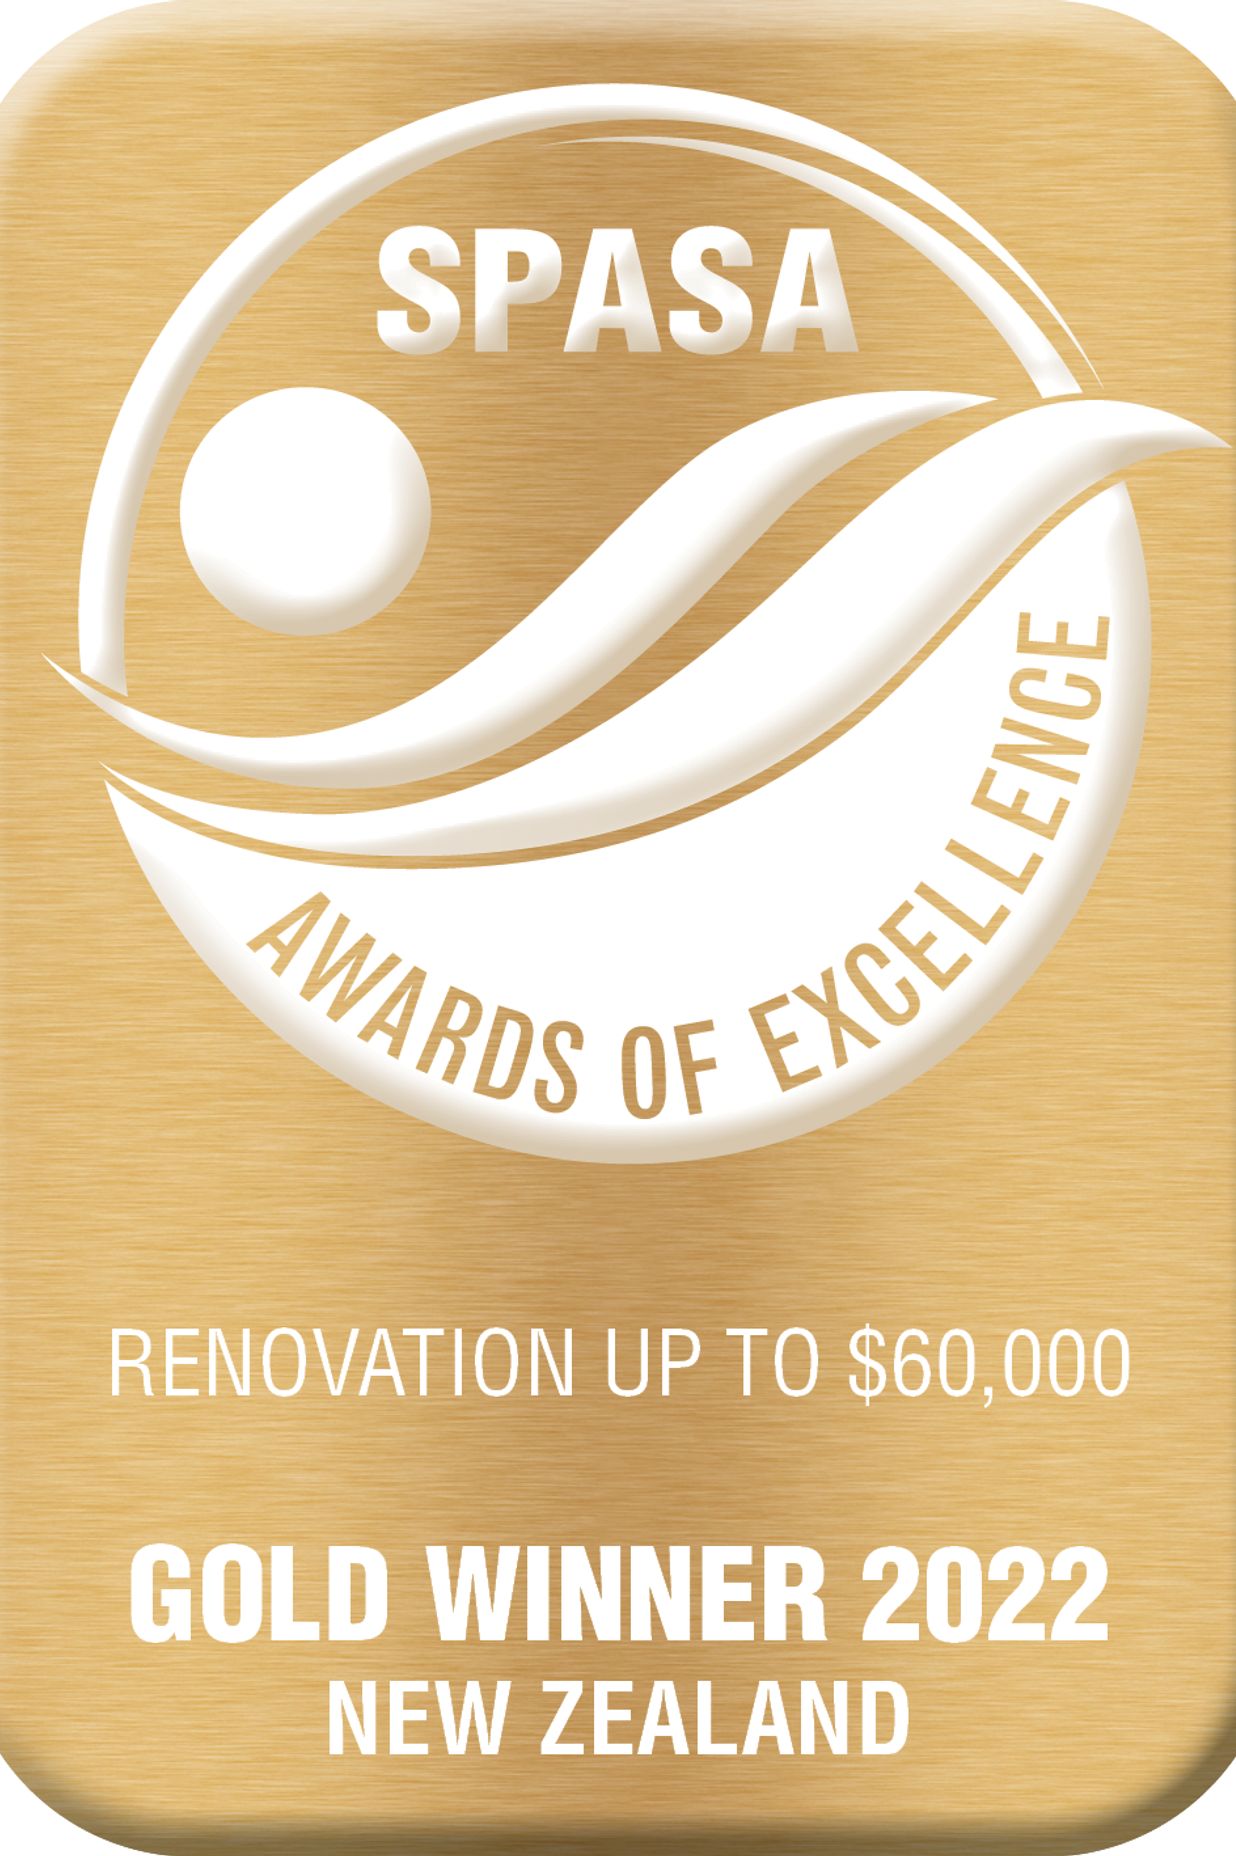 Very pleased to have received the awards to Renovation up to $60,000 at the SPASA NZ Awards of Excellence 2022 for this project